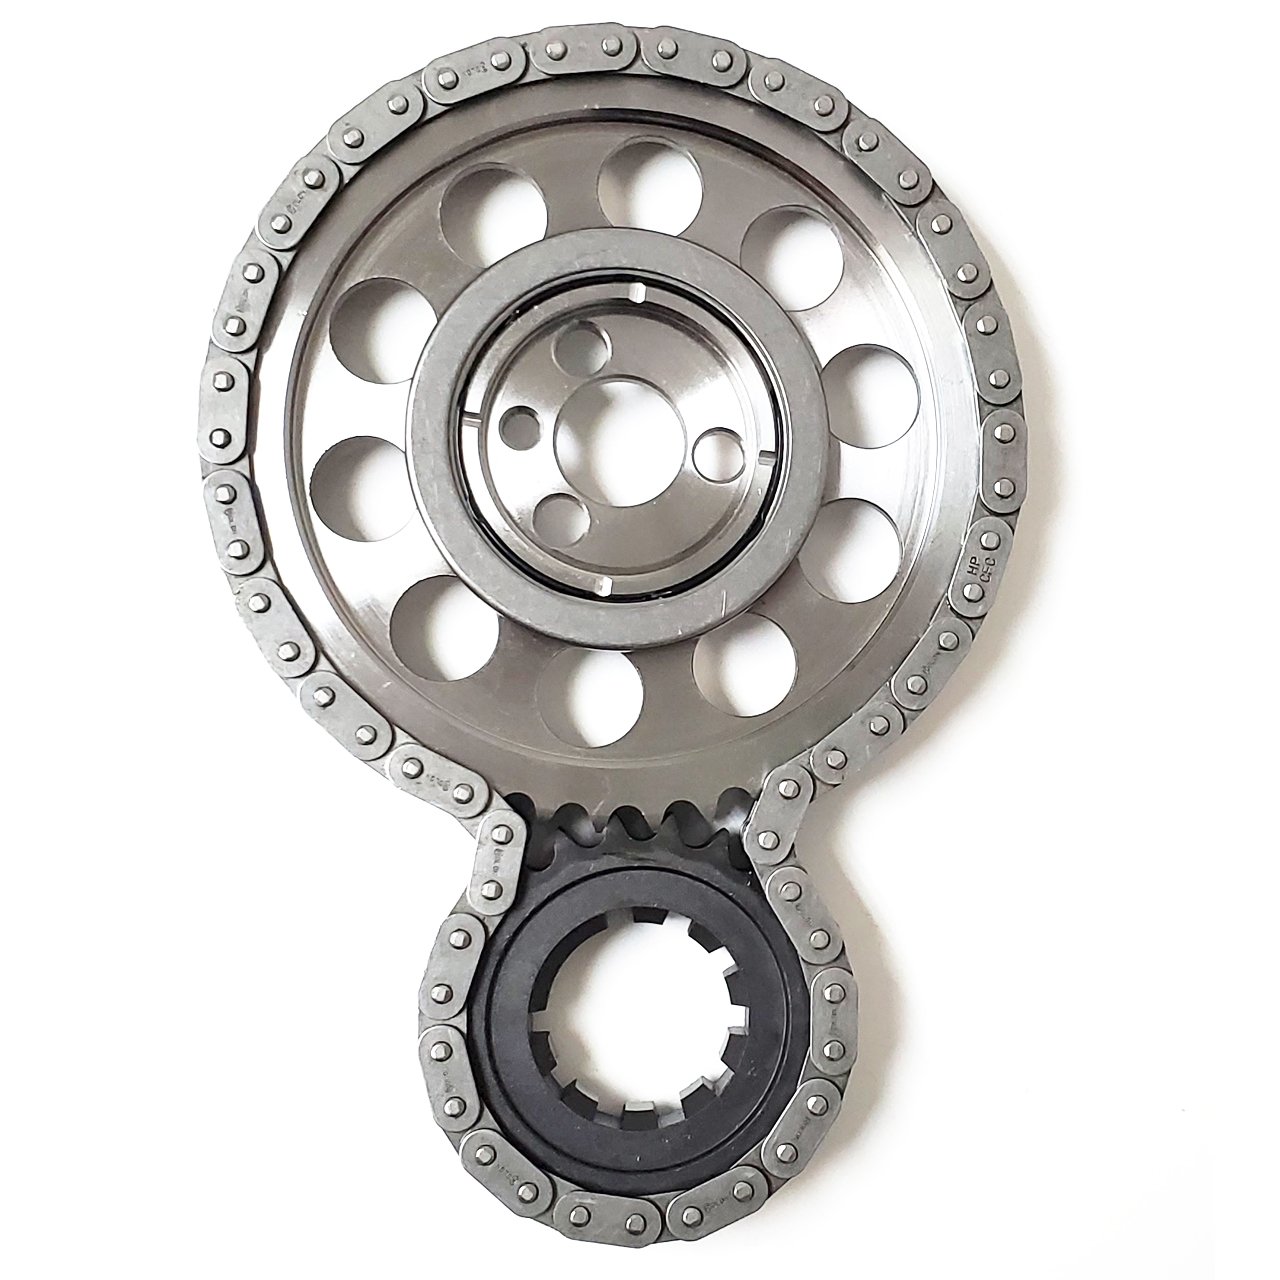 Double-Roller Timing Chain and Gear Set for Chevy V6 262, 1985-1993 Small Block Chevy 305/350 with Factory Roller Cam